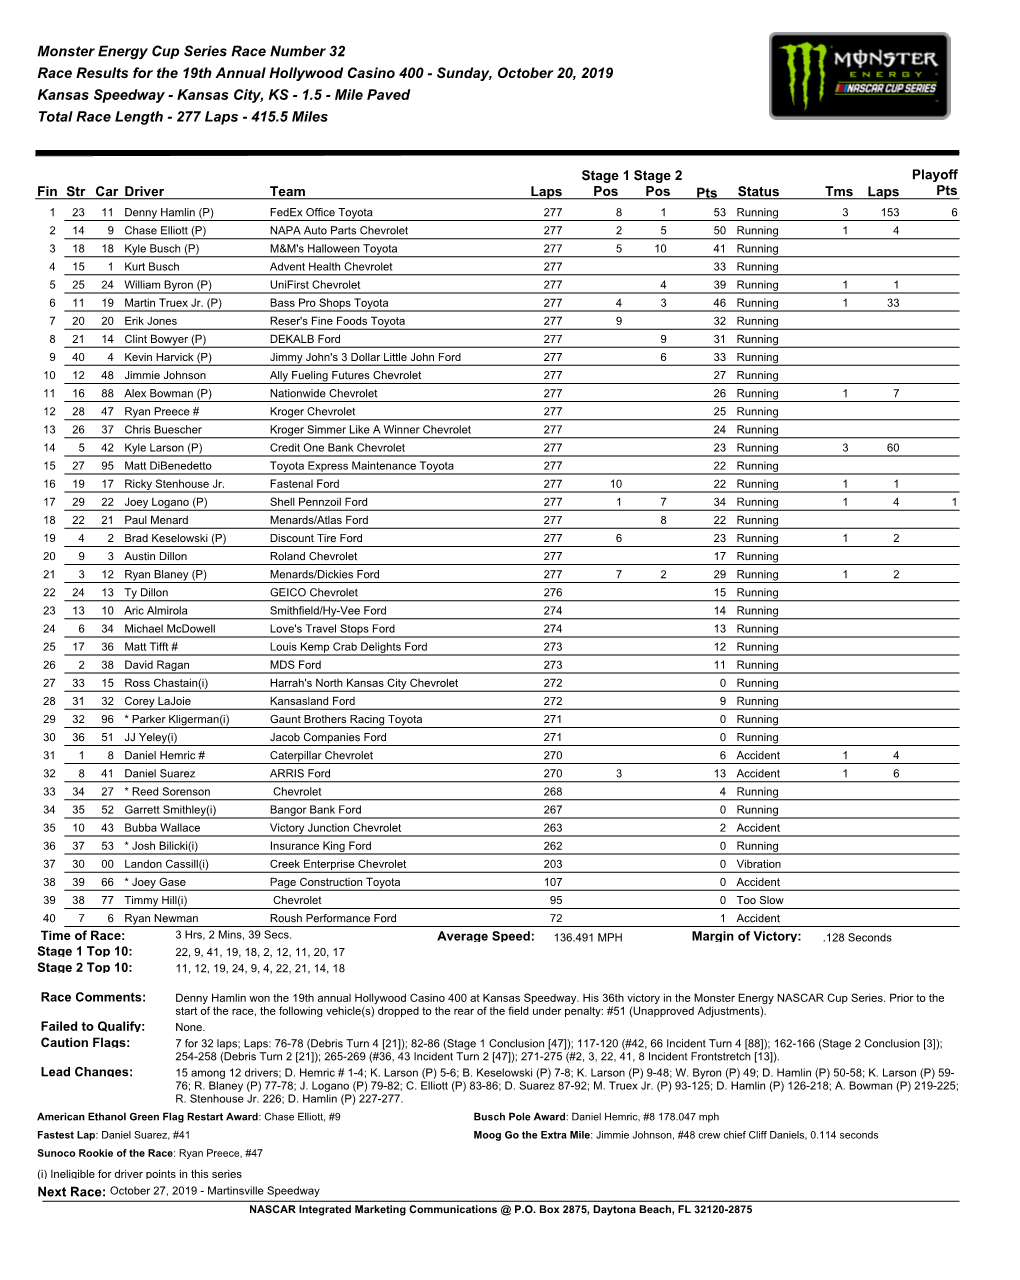 Monster Energy Cup Series Race Number 32 Race Results for The